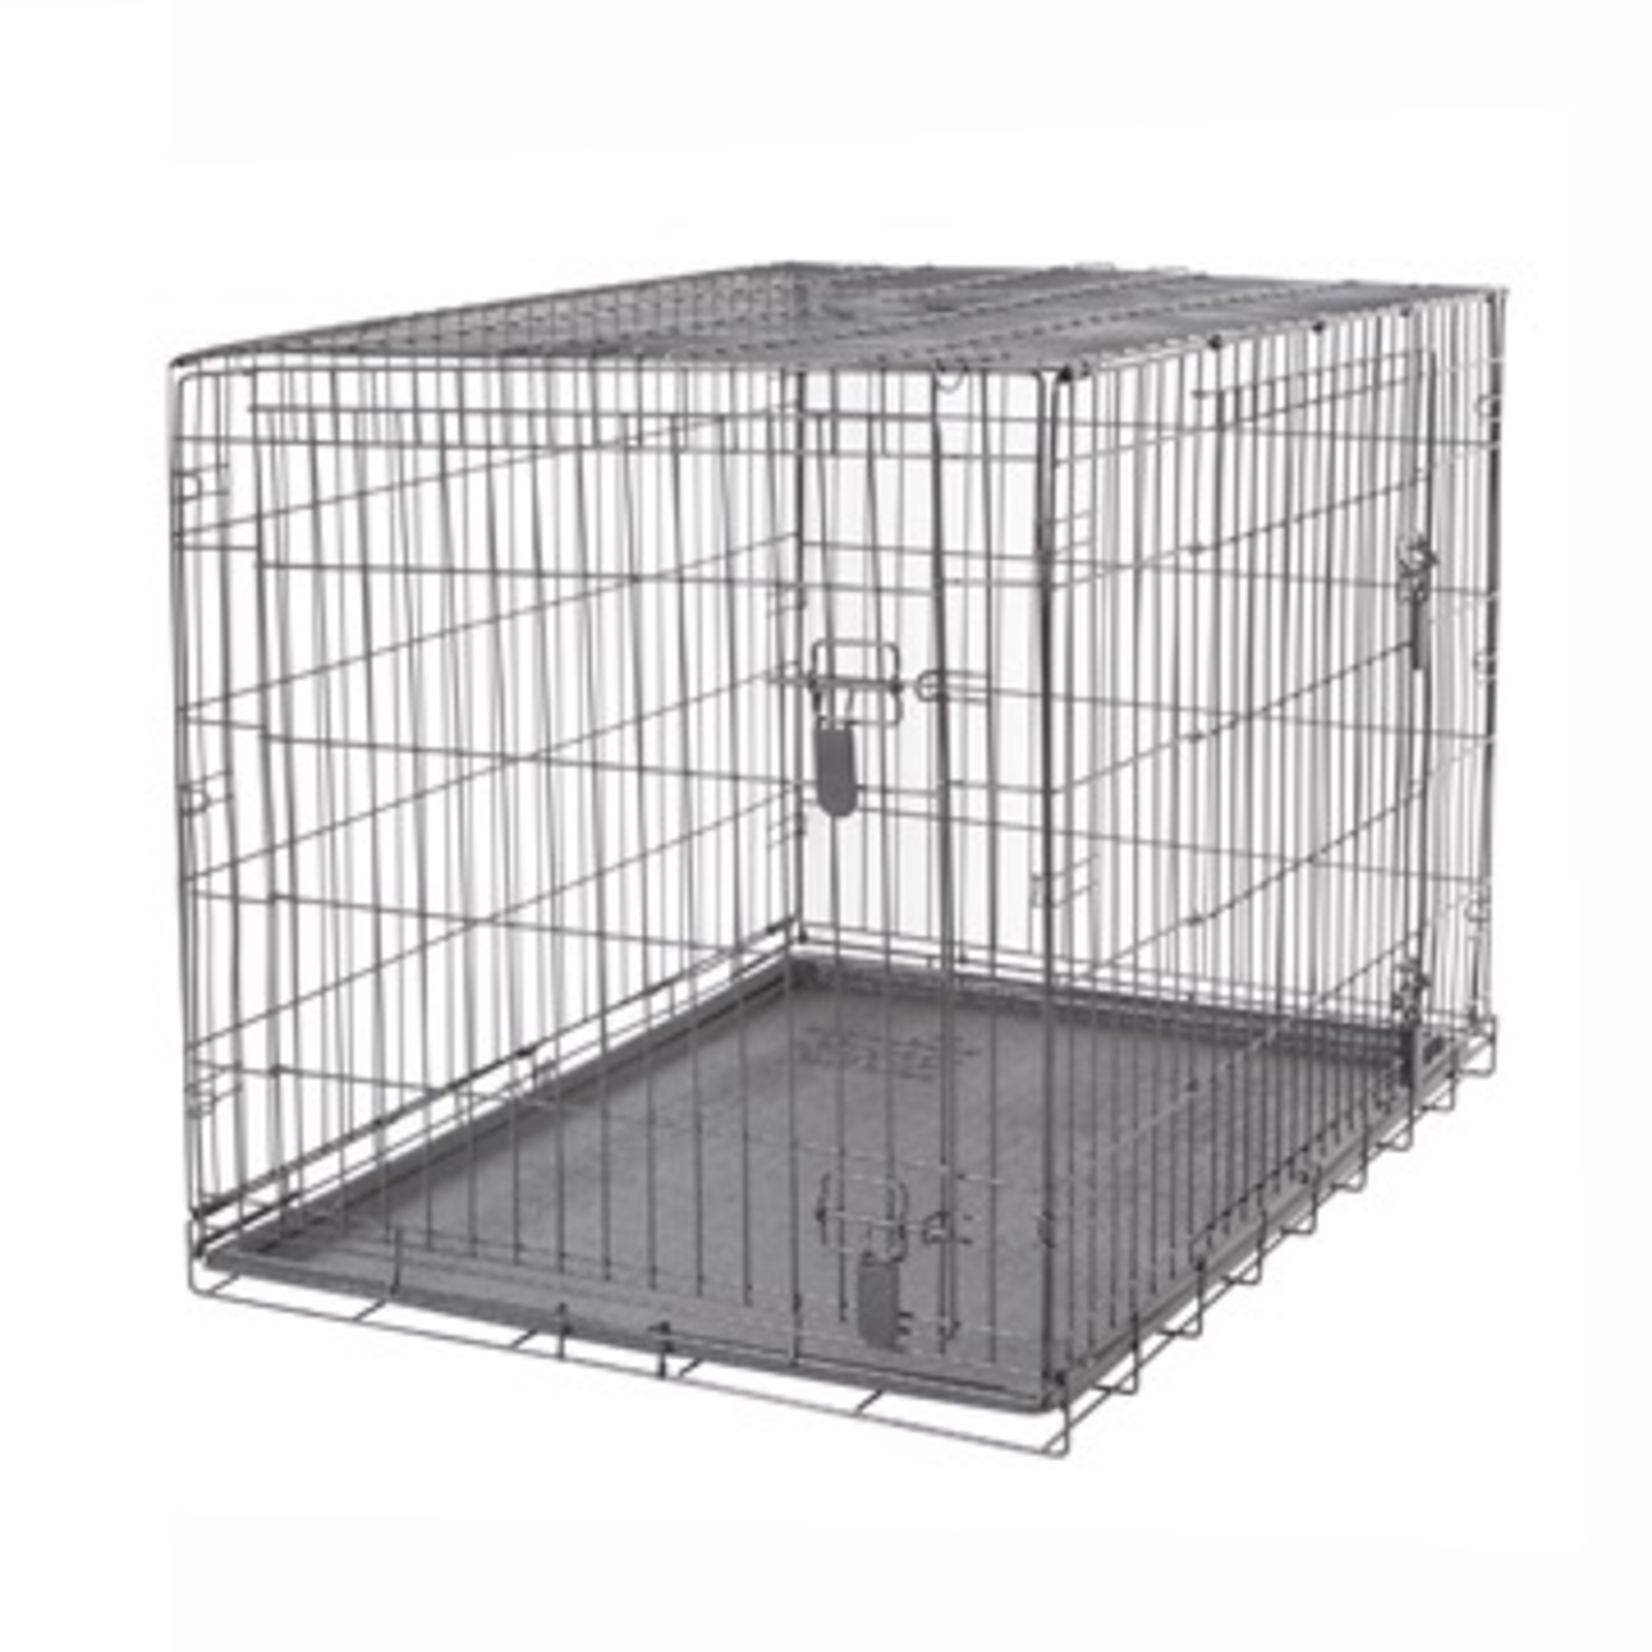 DOG IT (W) Dogit Two Door Wire Home Crates with divider - XXLarge - 122.5 x 74.5 x 80.5 cm (48 x 29.3 x 31.5 in)